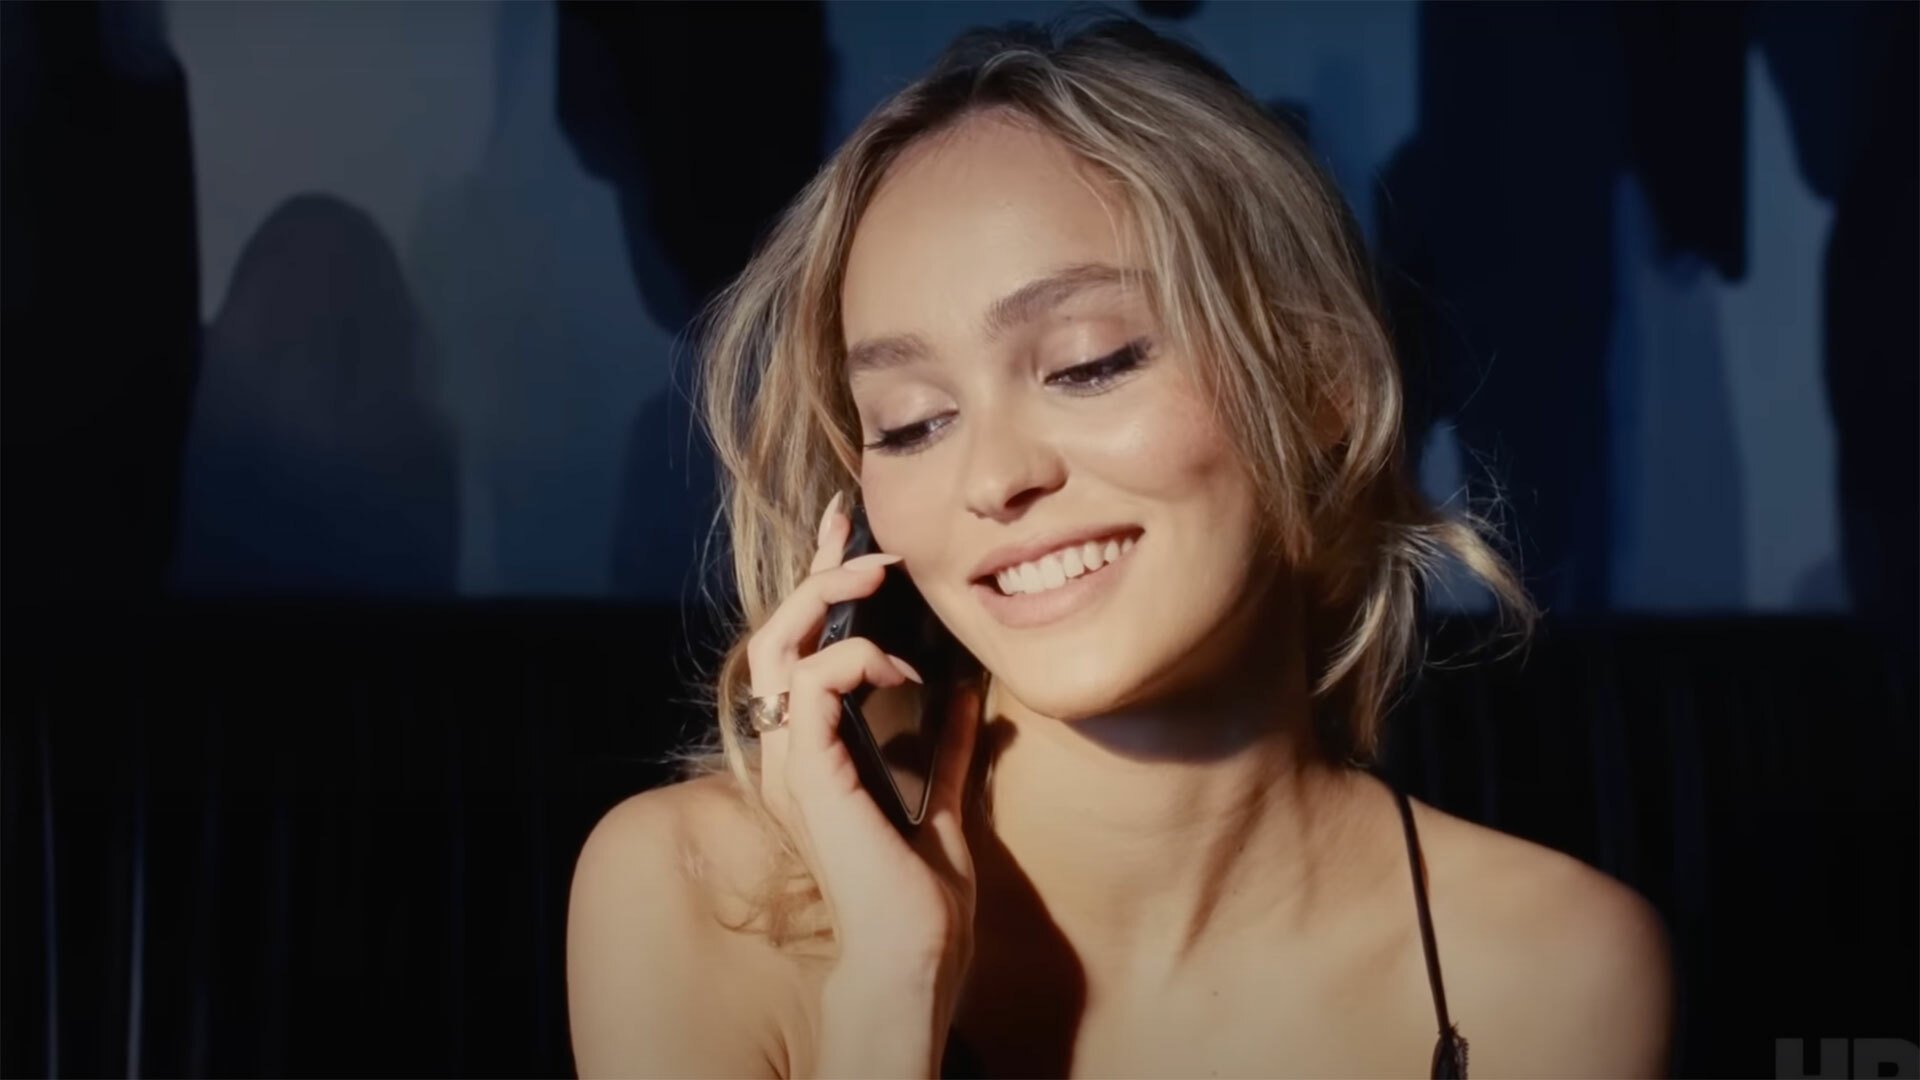 A smiling woman speaks on the phone.